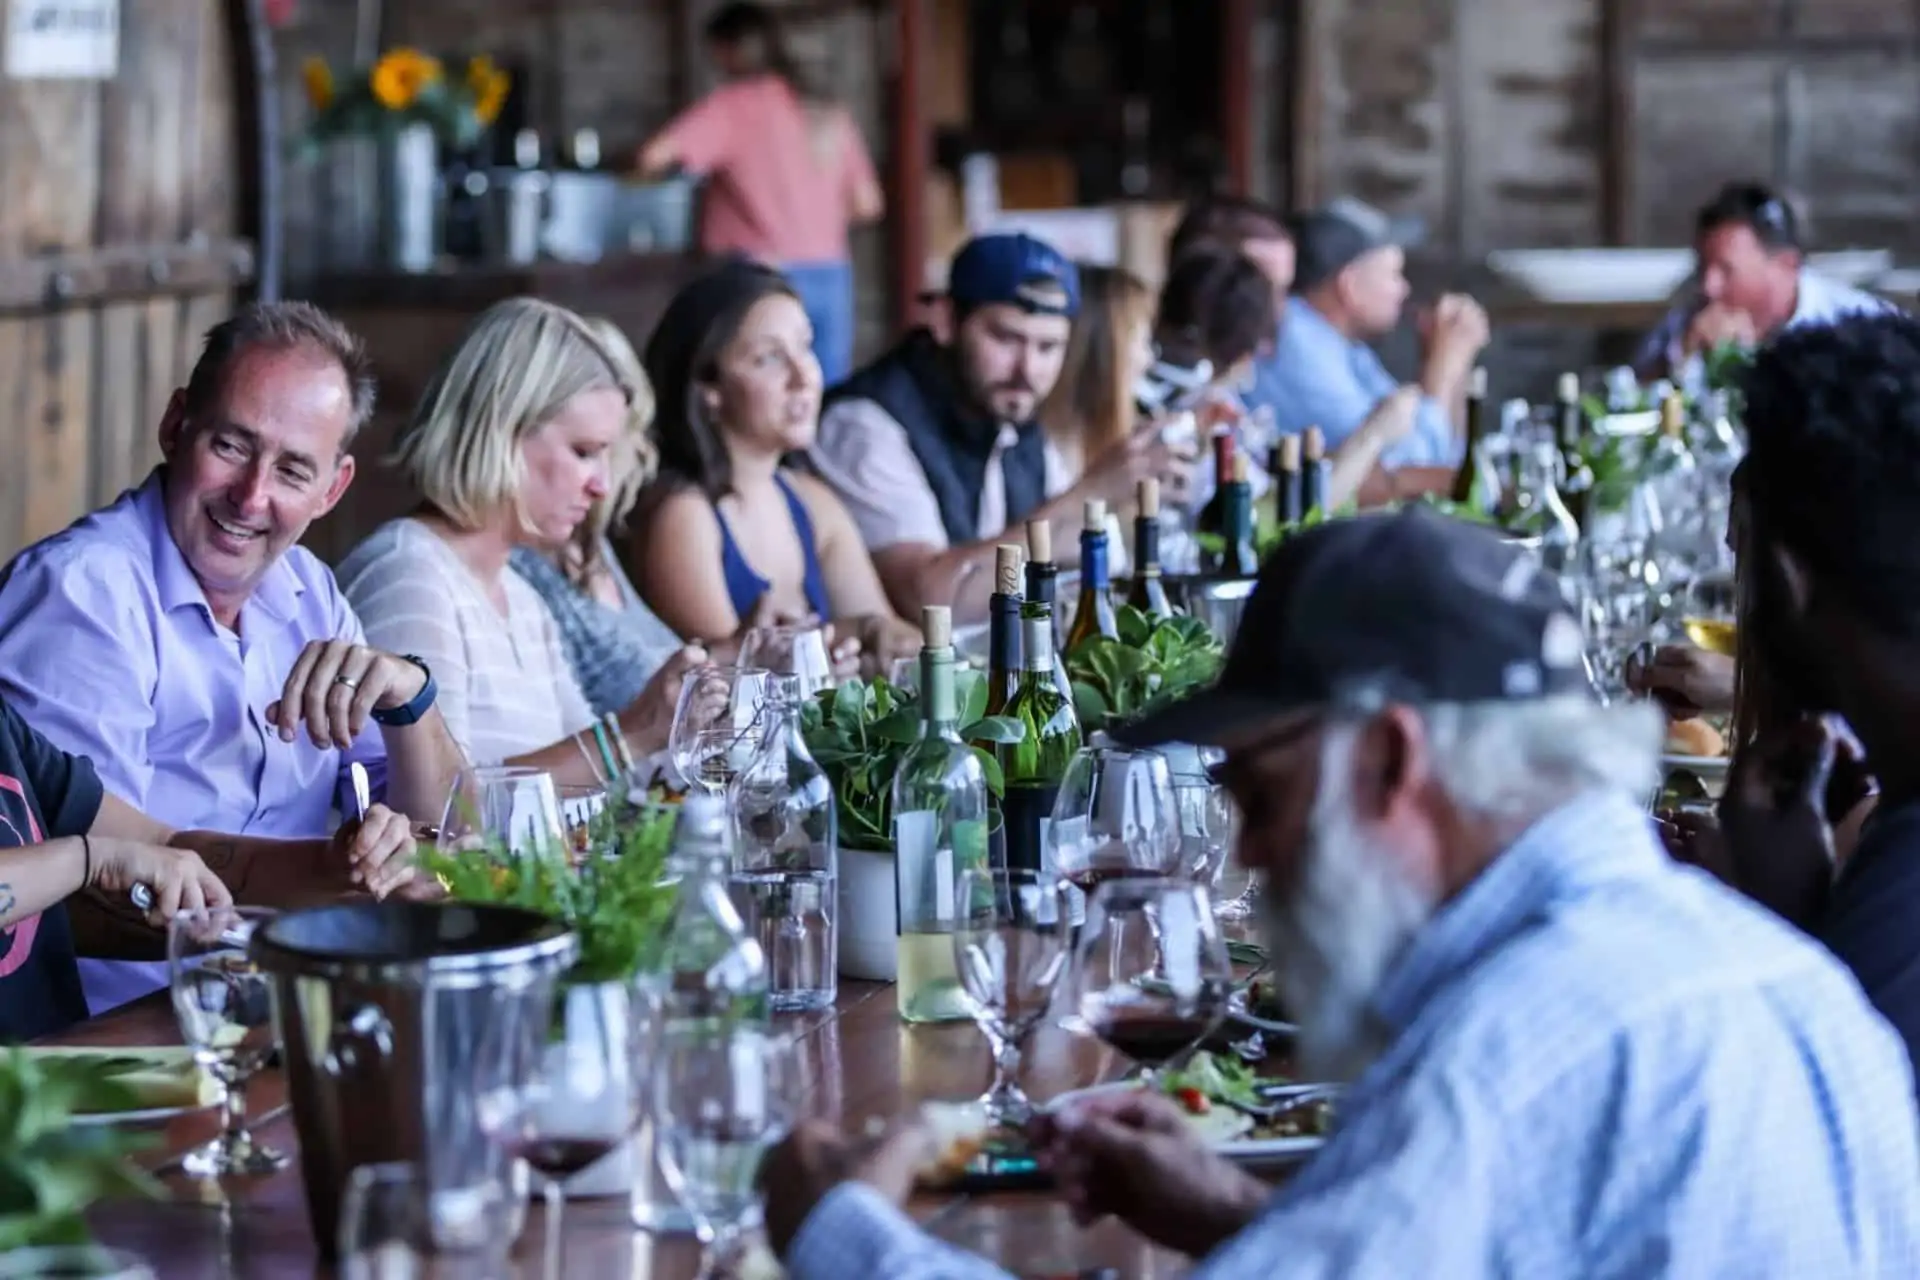 Inaugural Global Wine & Food Event for Wine Country.